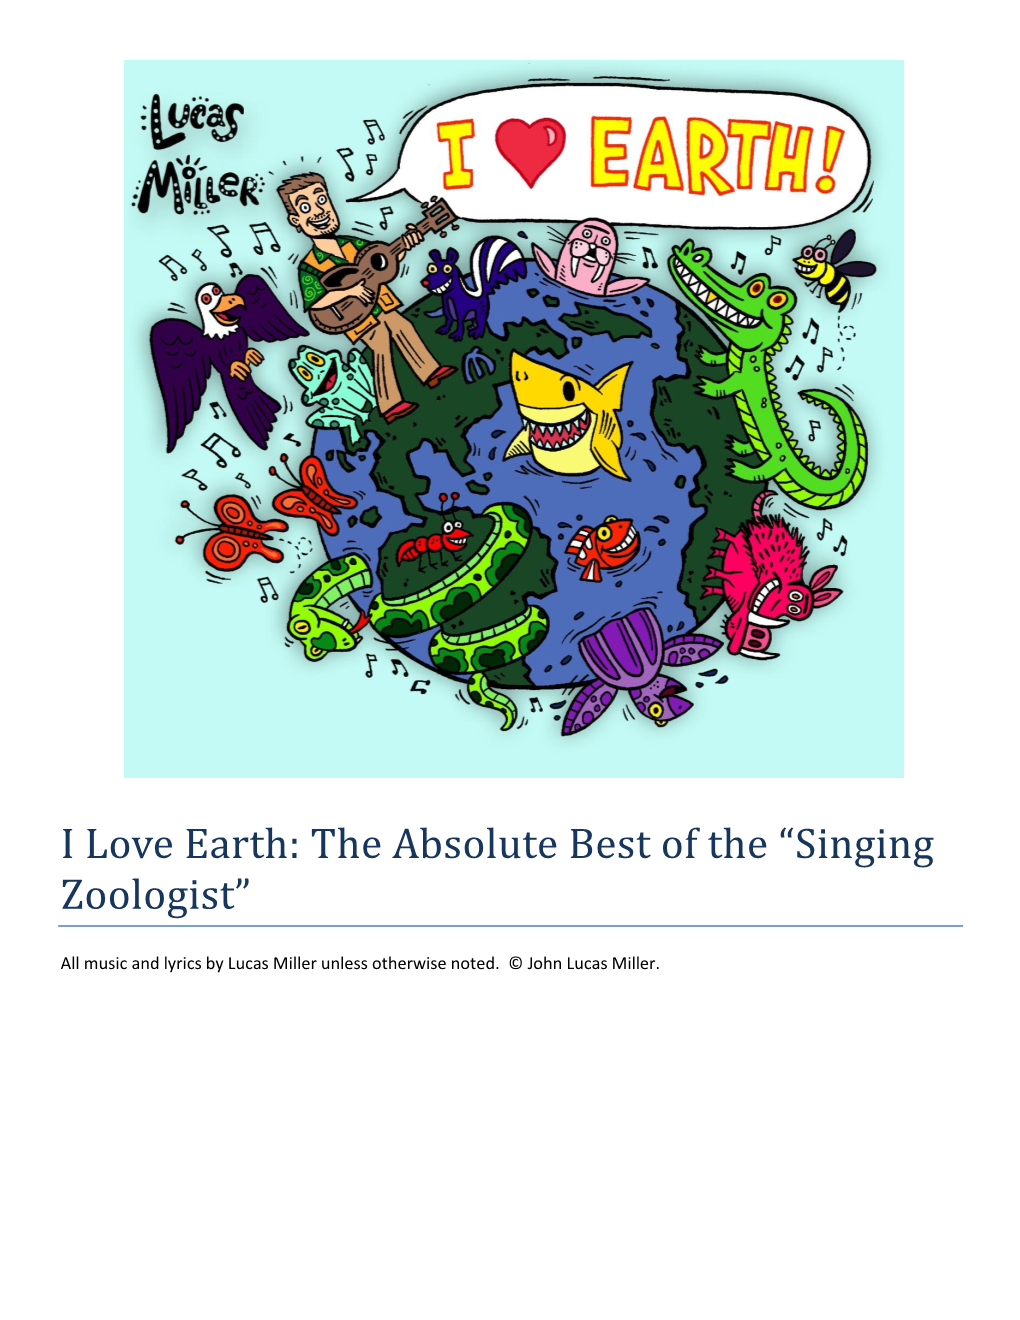 I Love Earth: the Absolute Best of the “Singing Zoologist”